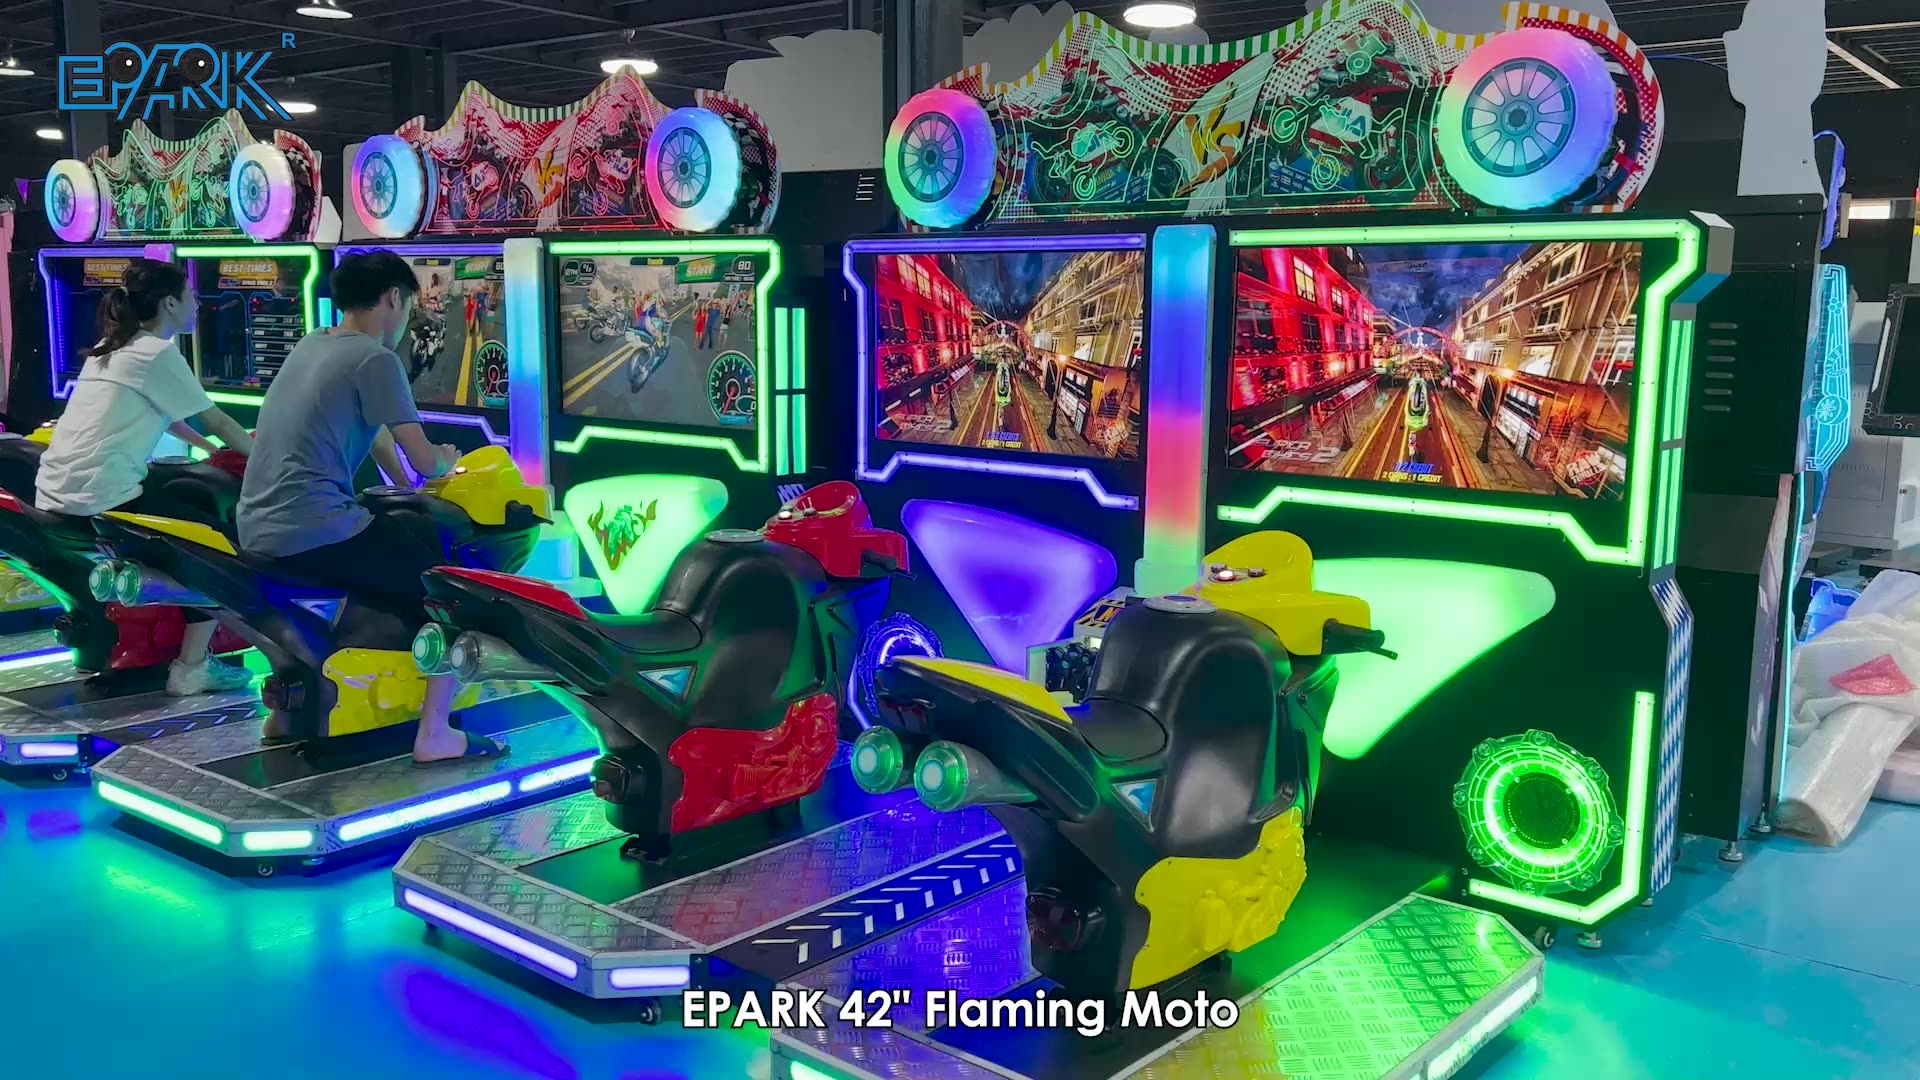 Source Indoor Coin Operated Arcade Moto Flaming Motor Racing Simulator  Video Game Machines For Adult on m.alibaba.com